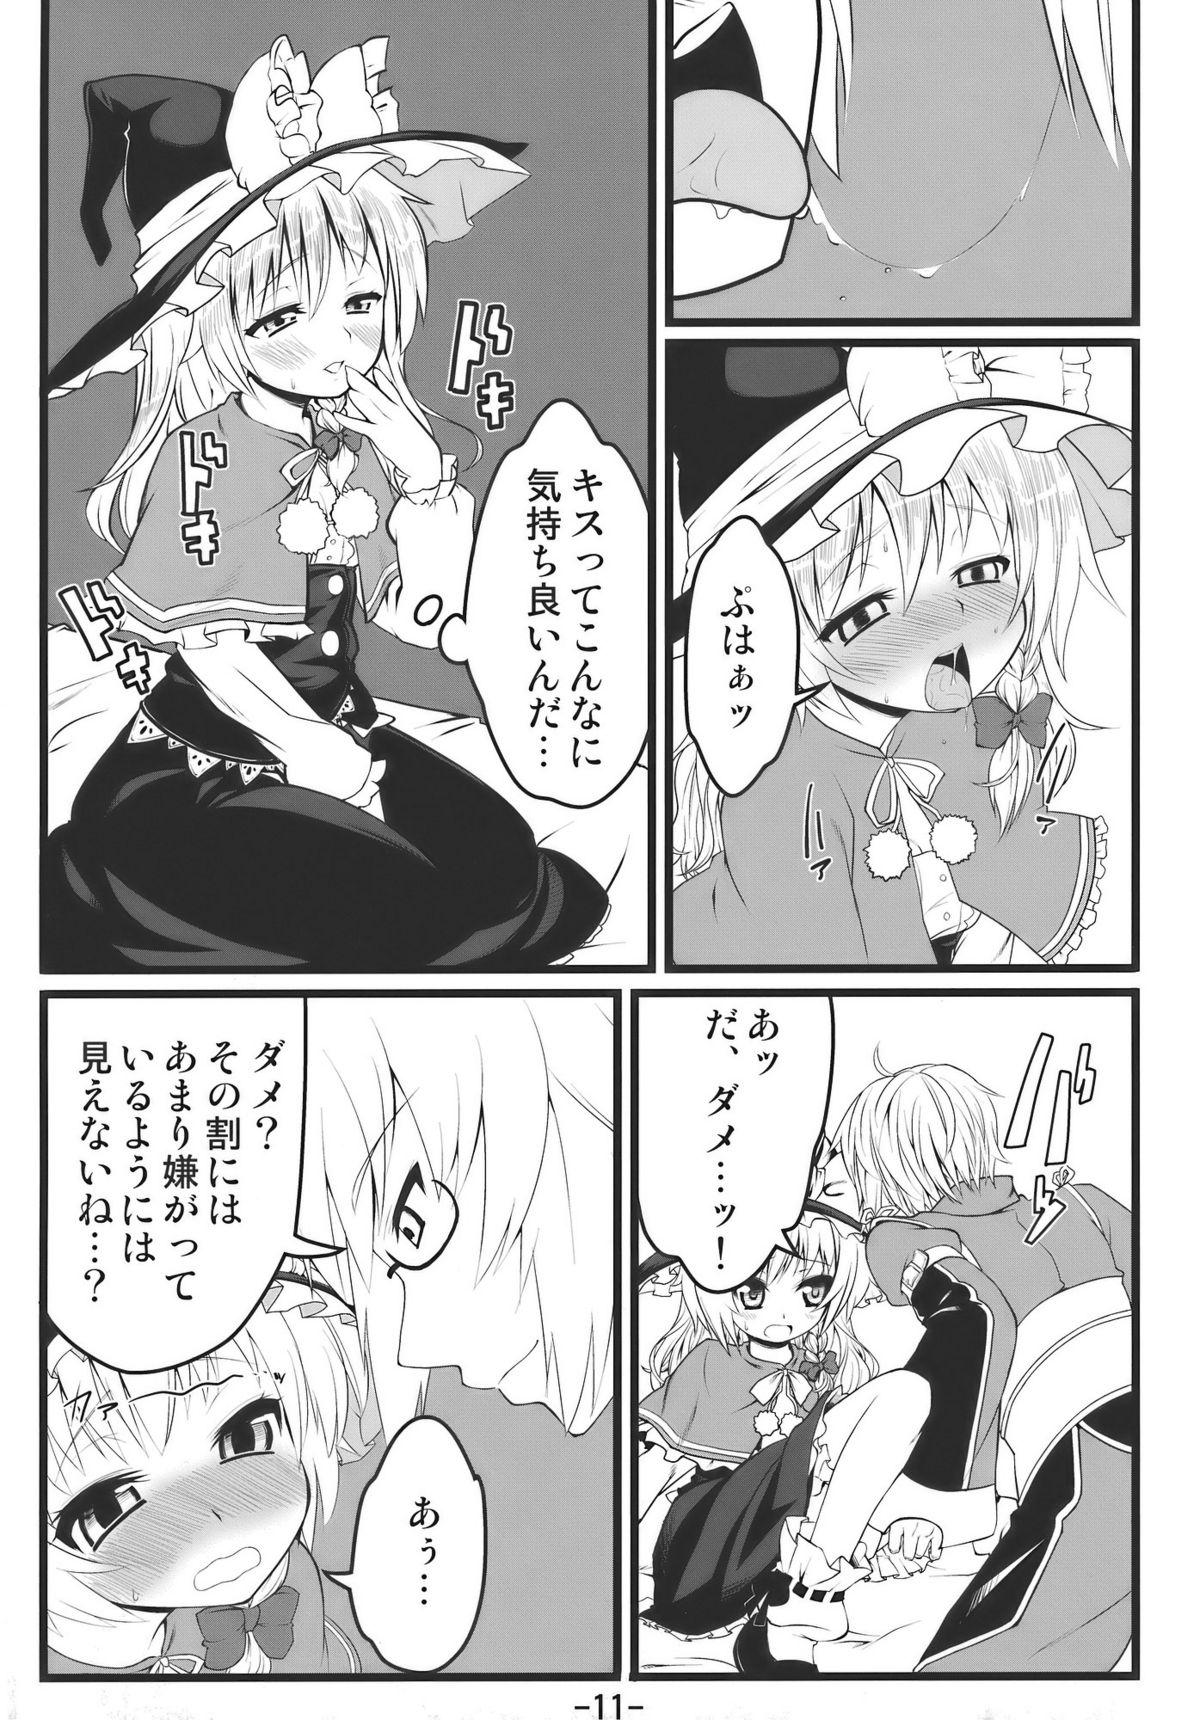 Hot Fuck Memory of Junk - Touhou project Lesbians - Page 11